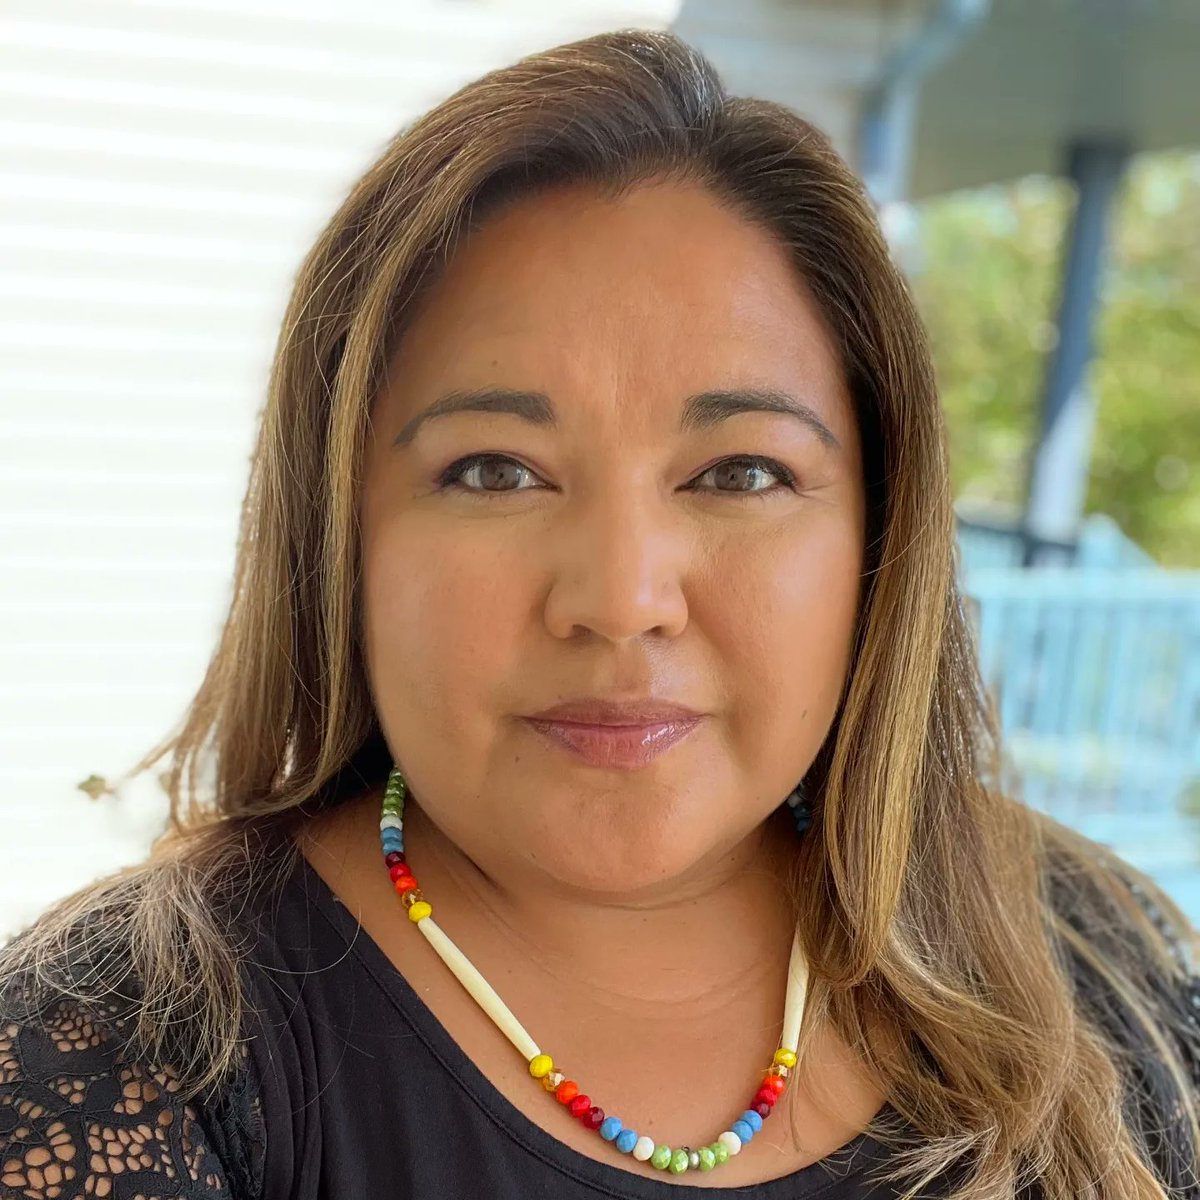 The Indigenous Bar Association in Canada (IBA) extends its heartfelt congratulations to Koren Lightning on her recent designation as King's Counsel by the Law Society of Alberta. To read the full press release please visit our website at indigenousbar.ca/press-releases